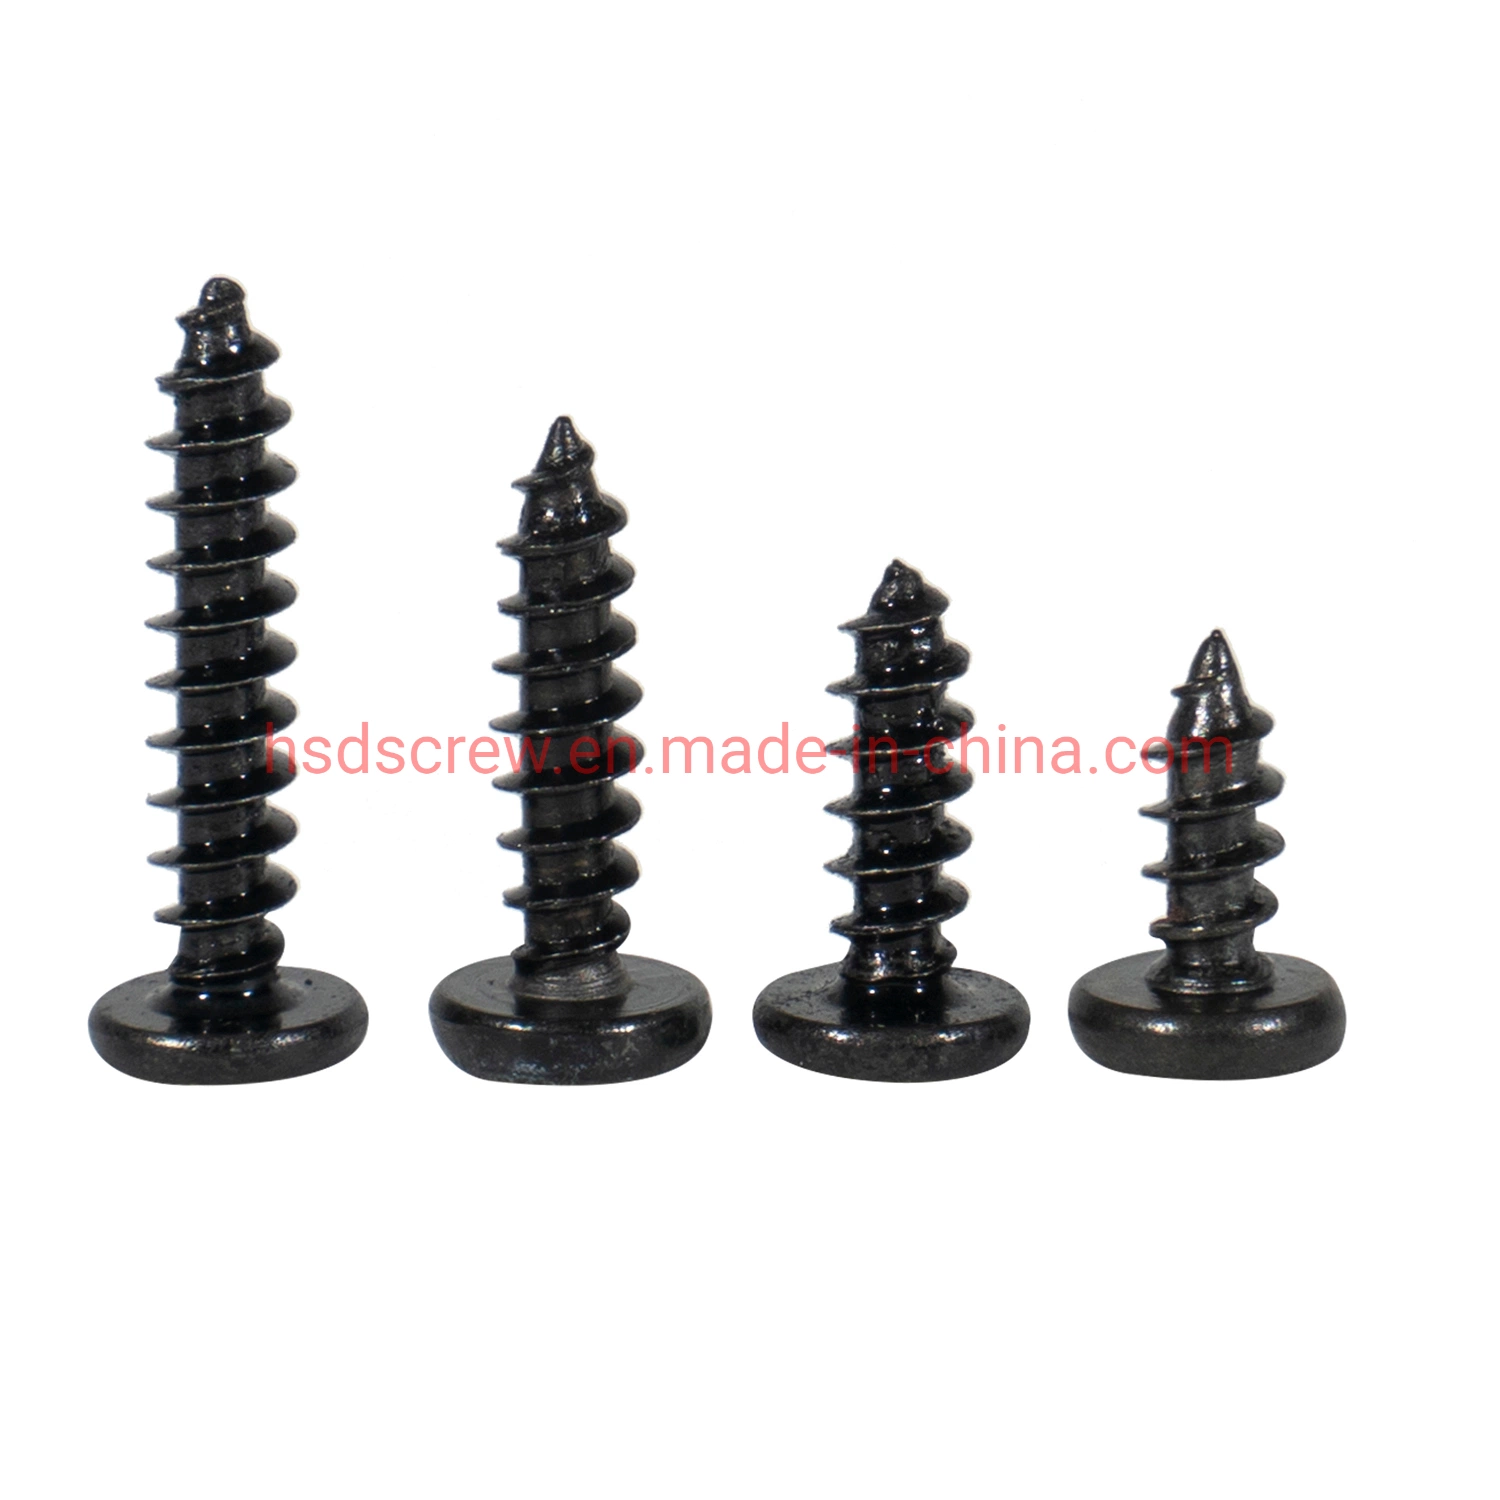 Made in China Hardware Screws Bolt China Wholesale Building Material Tornillos Clipboard Screw Carbon Steel Drywall Screw Self Tapping Screw